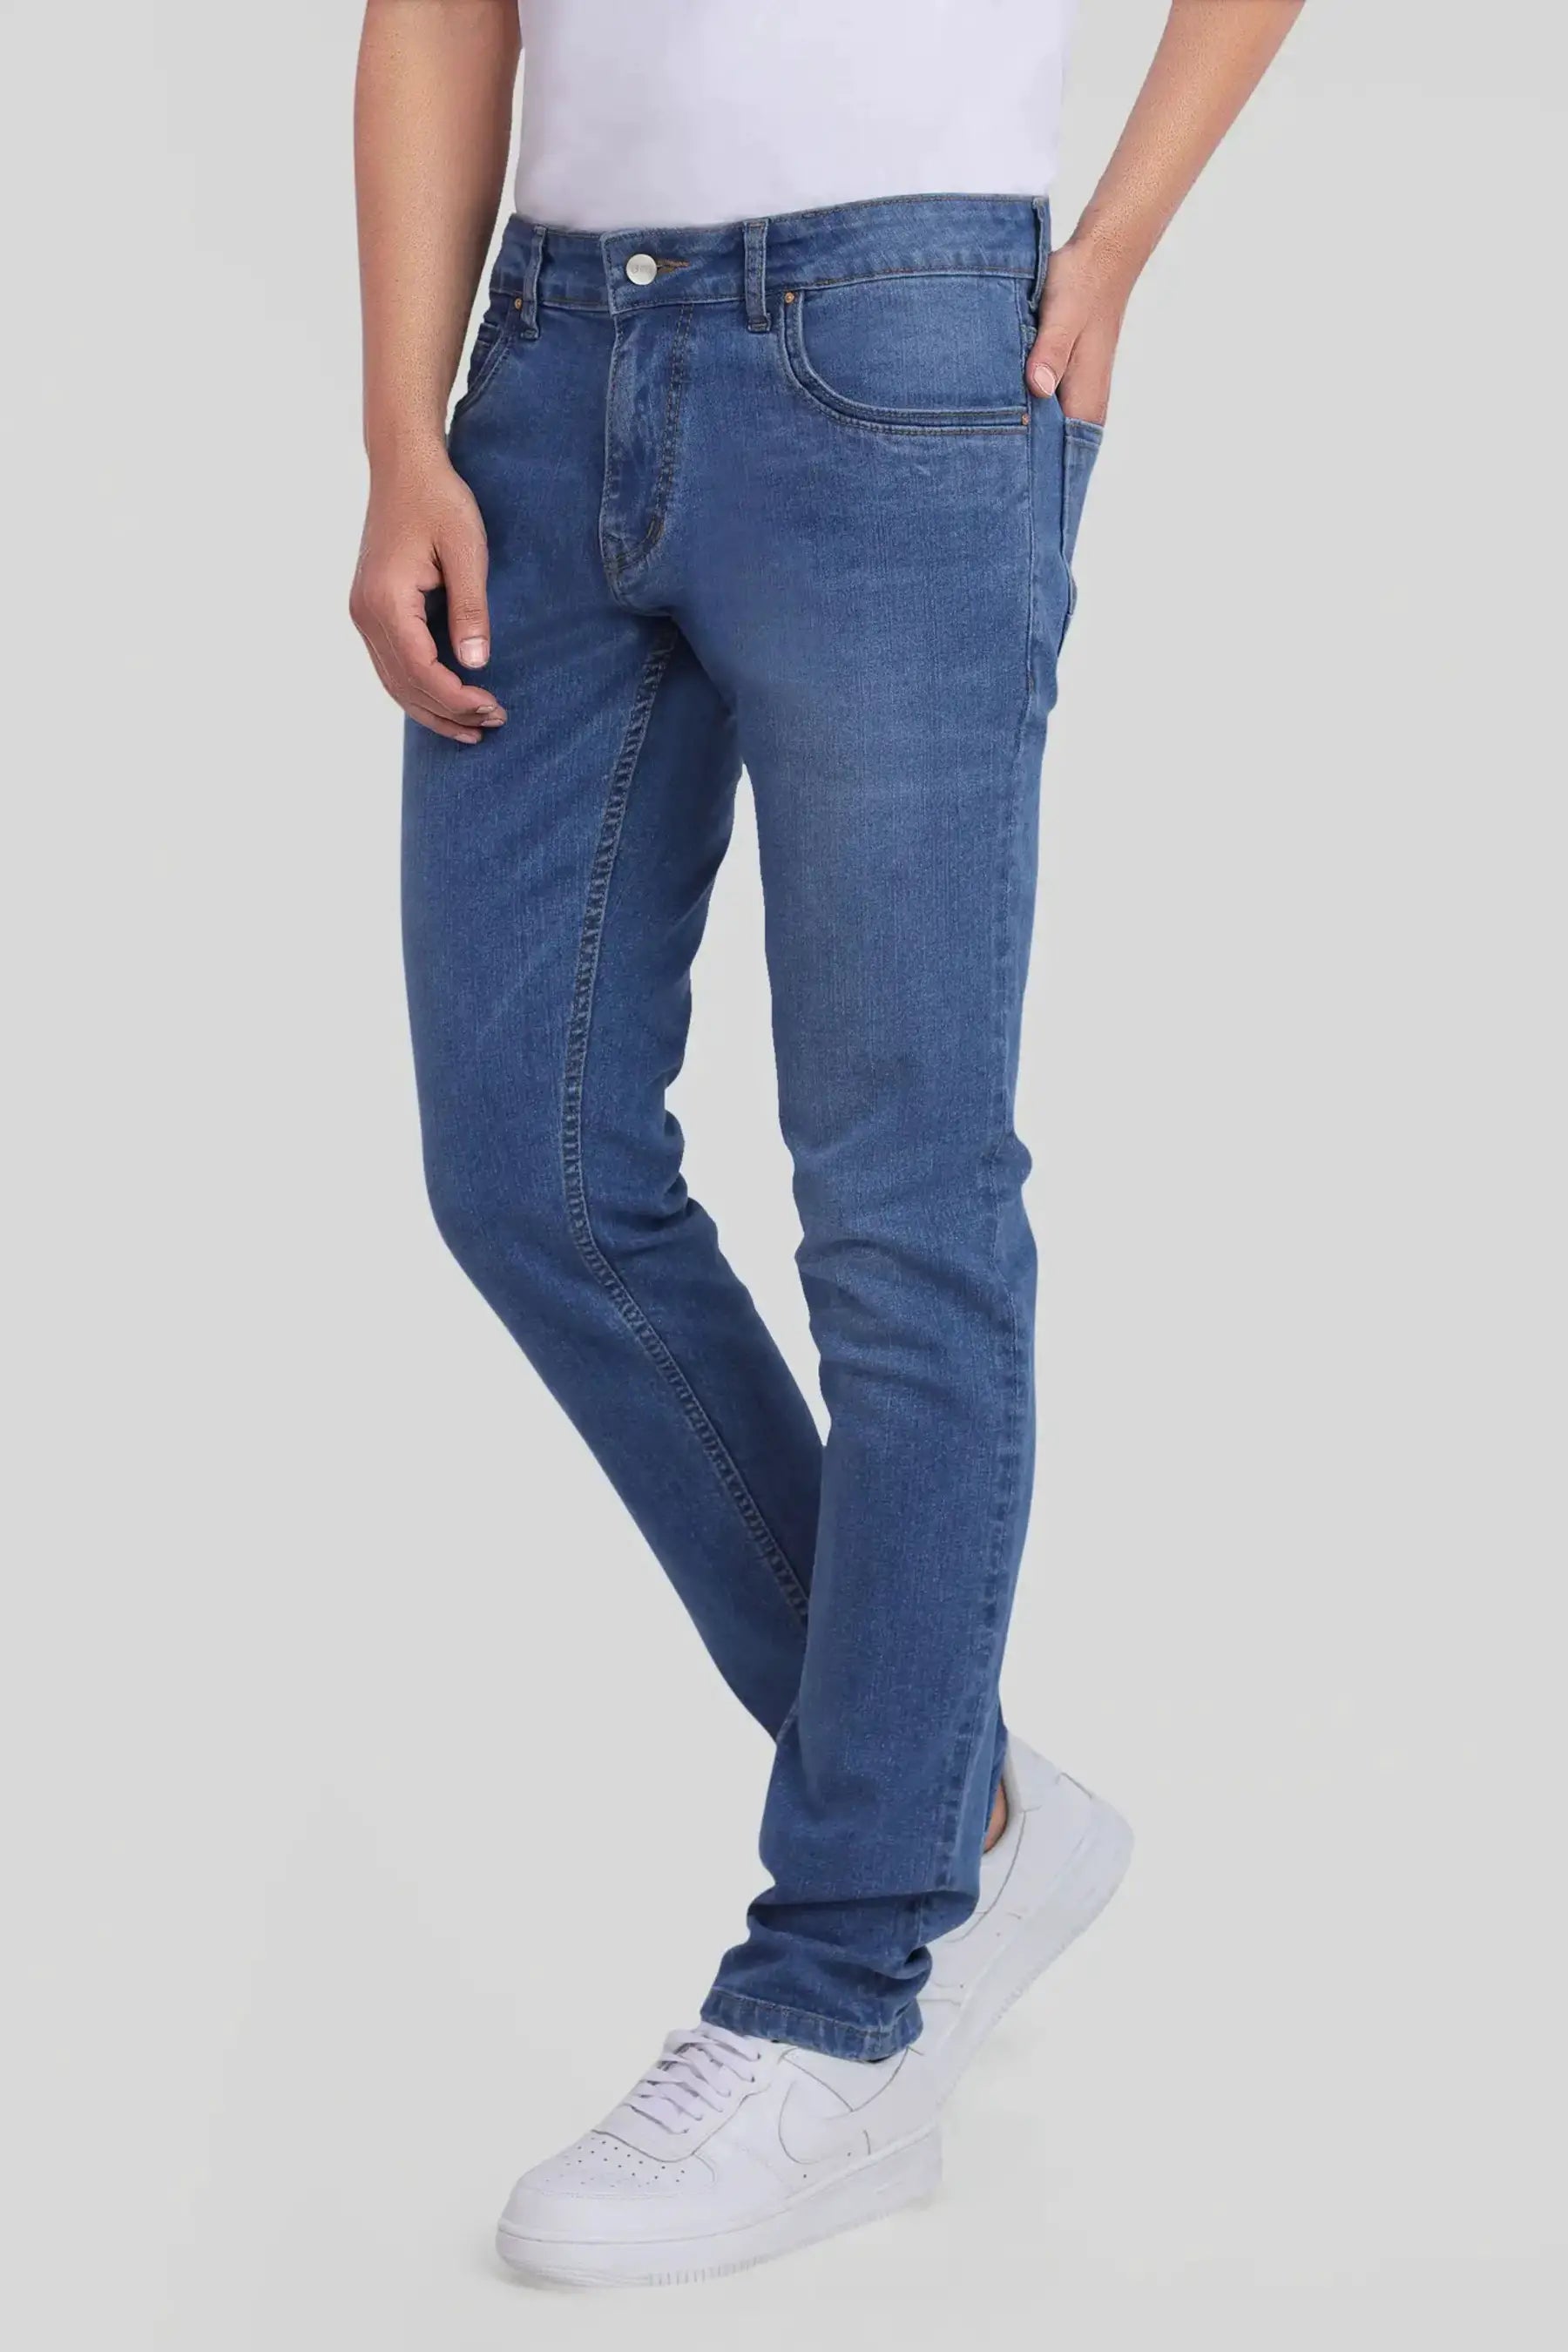 Shop High Quality Custom Made Skinny Fit Jeans Online – Enim